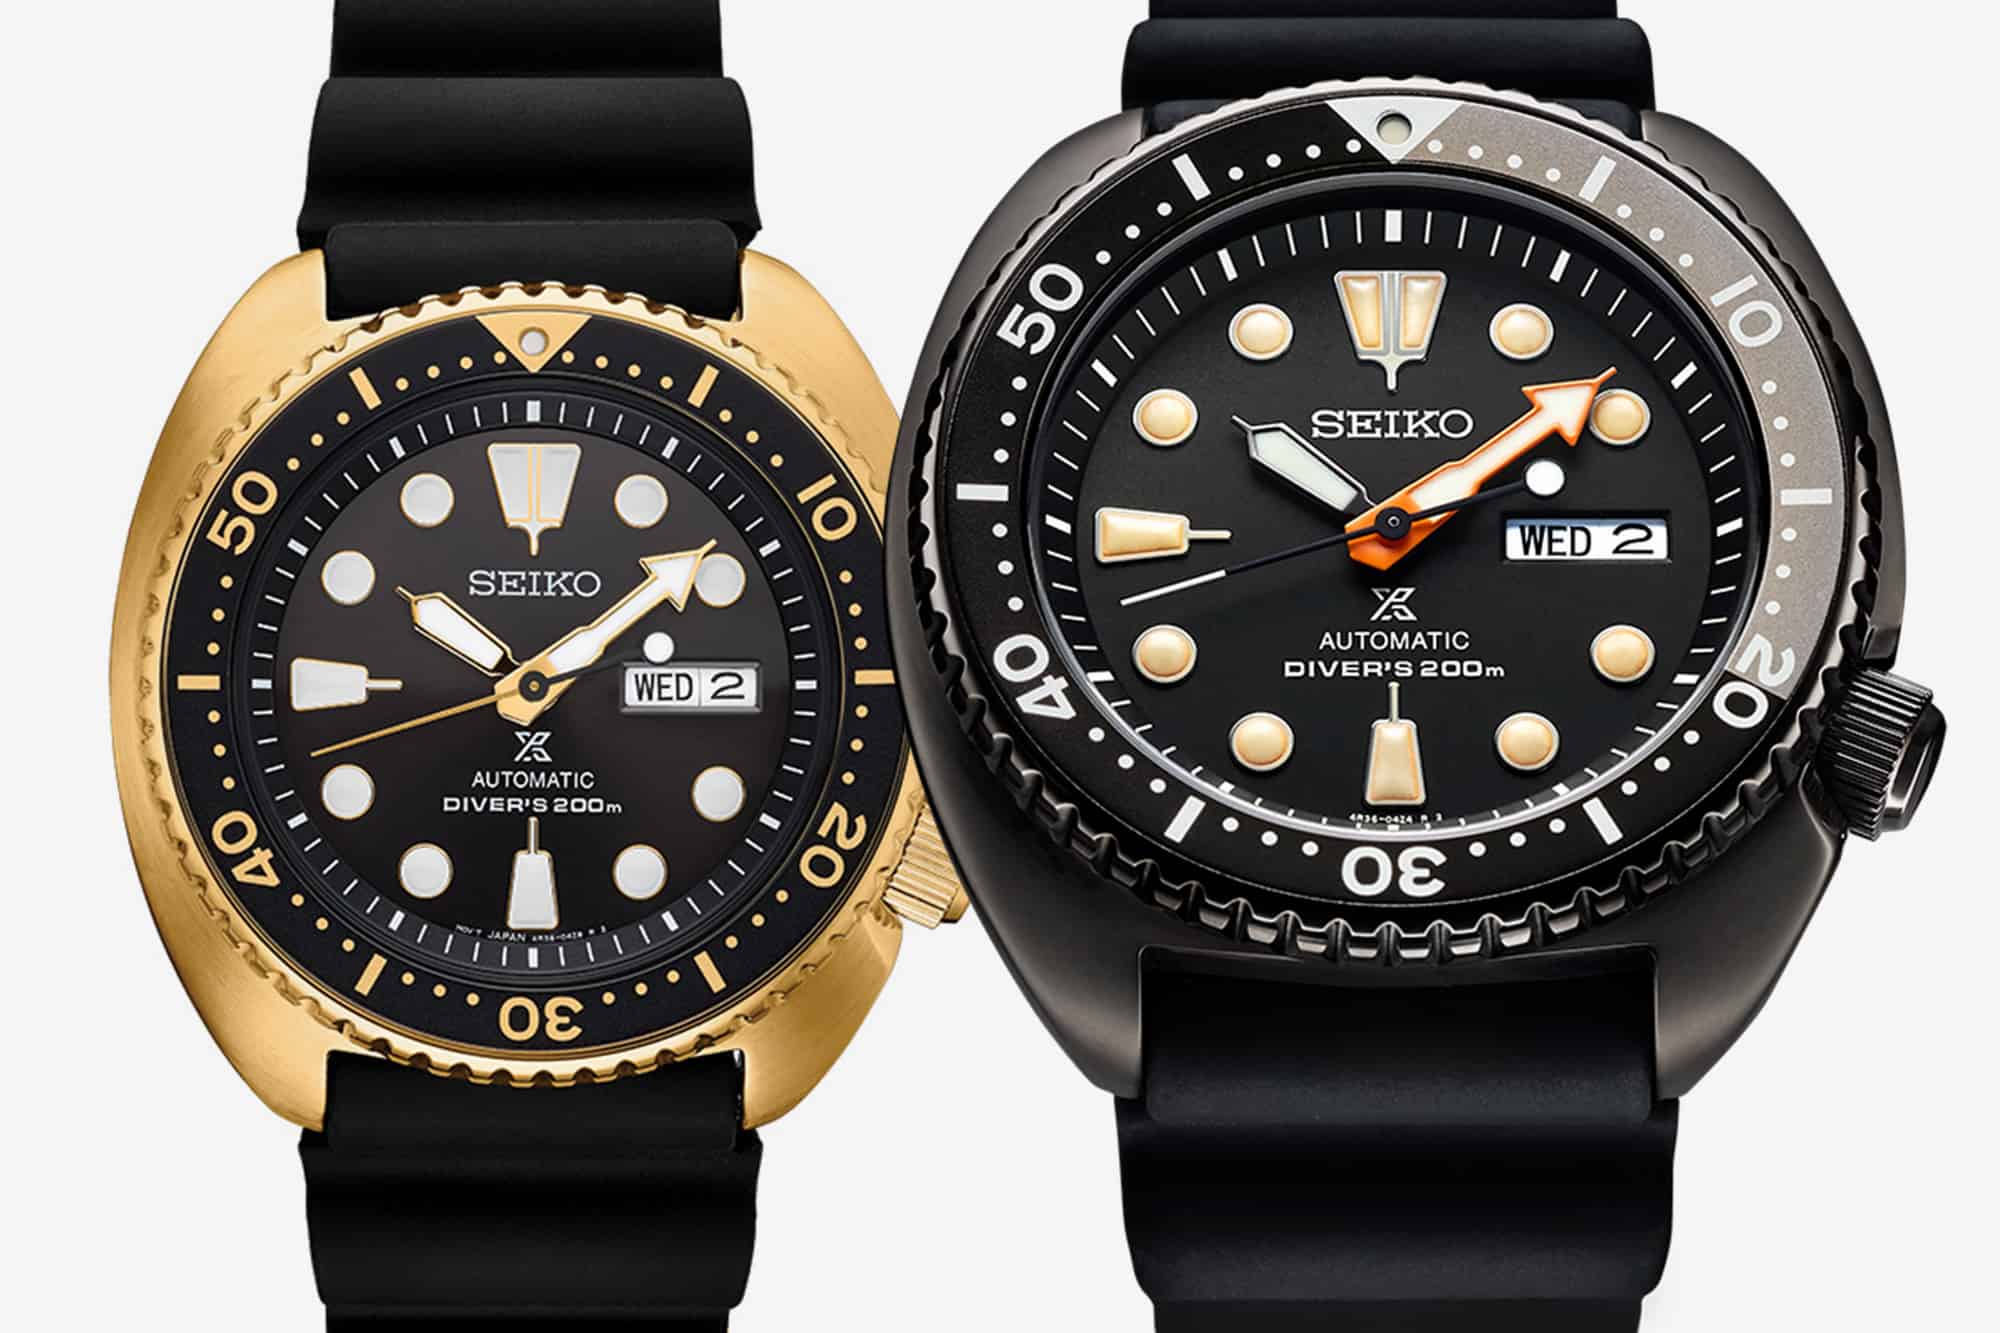 Introducing Two New Seiko Turtles "Black Series" (ref. SRPC49) and